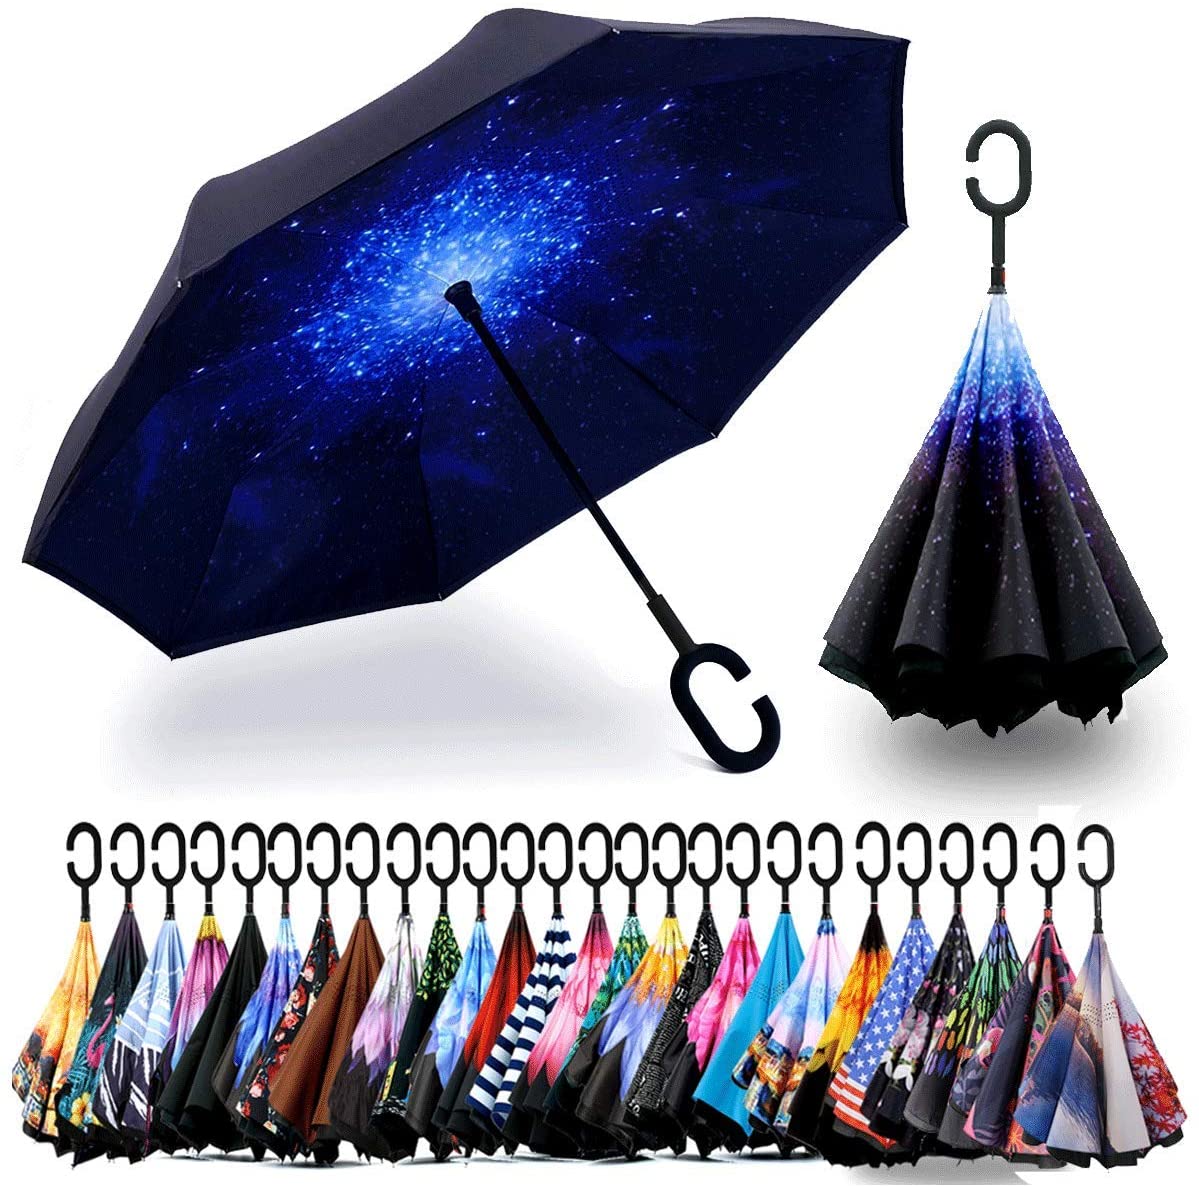 MRTLLOA Double Layer Inverted Umbrella with C-Shaped Handle Anti-UV Waterproof Windproof Straight Umbrella for Car Rain Outdoor Use 